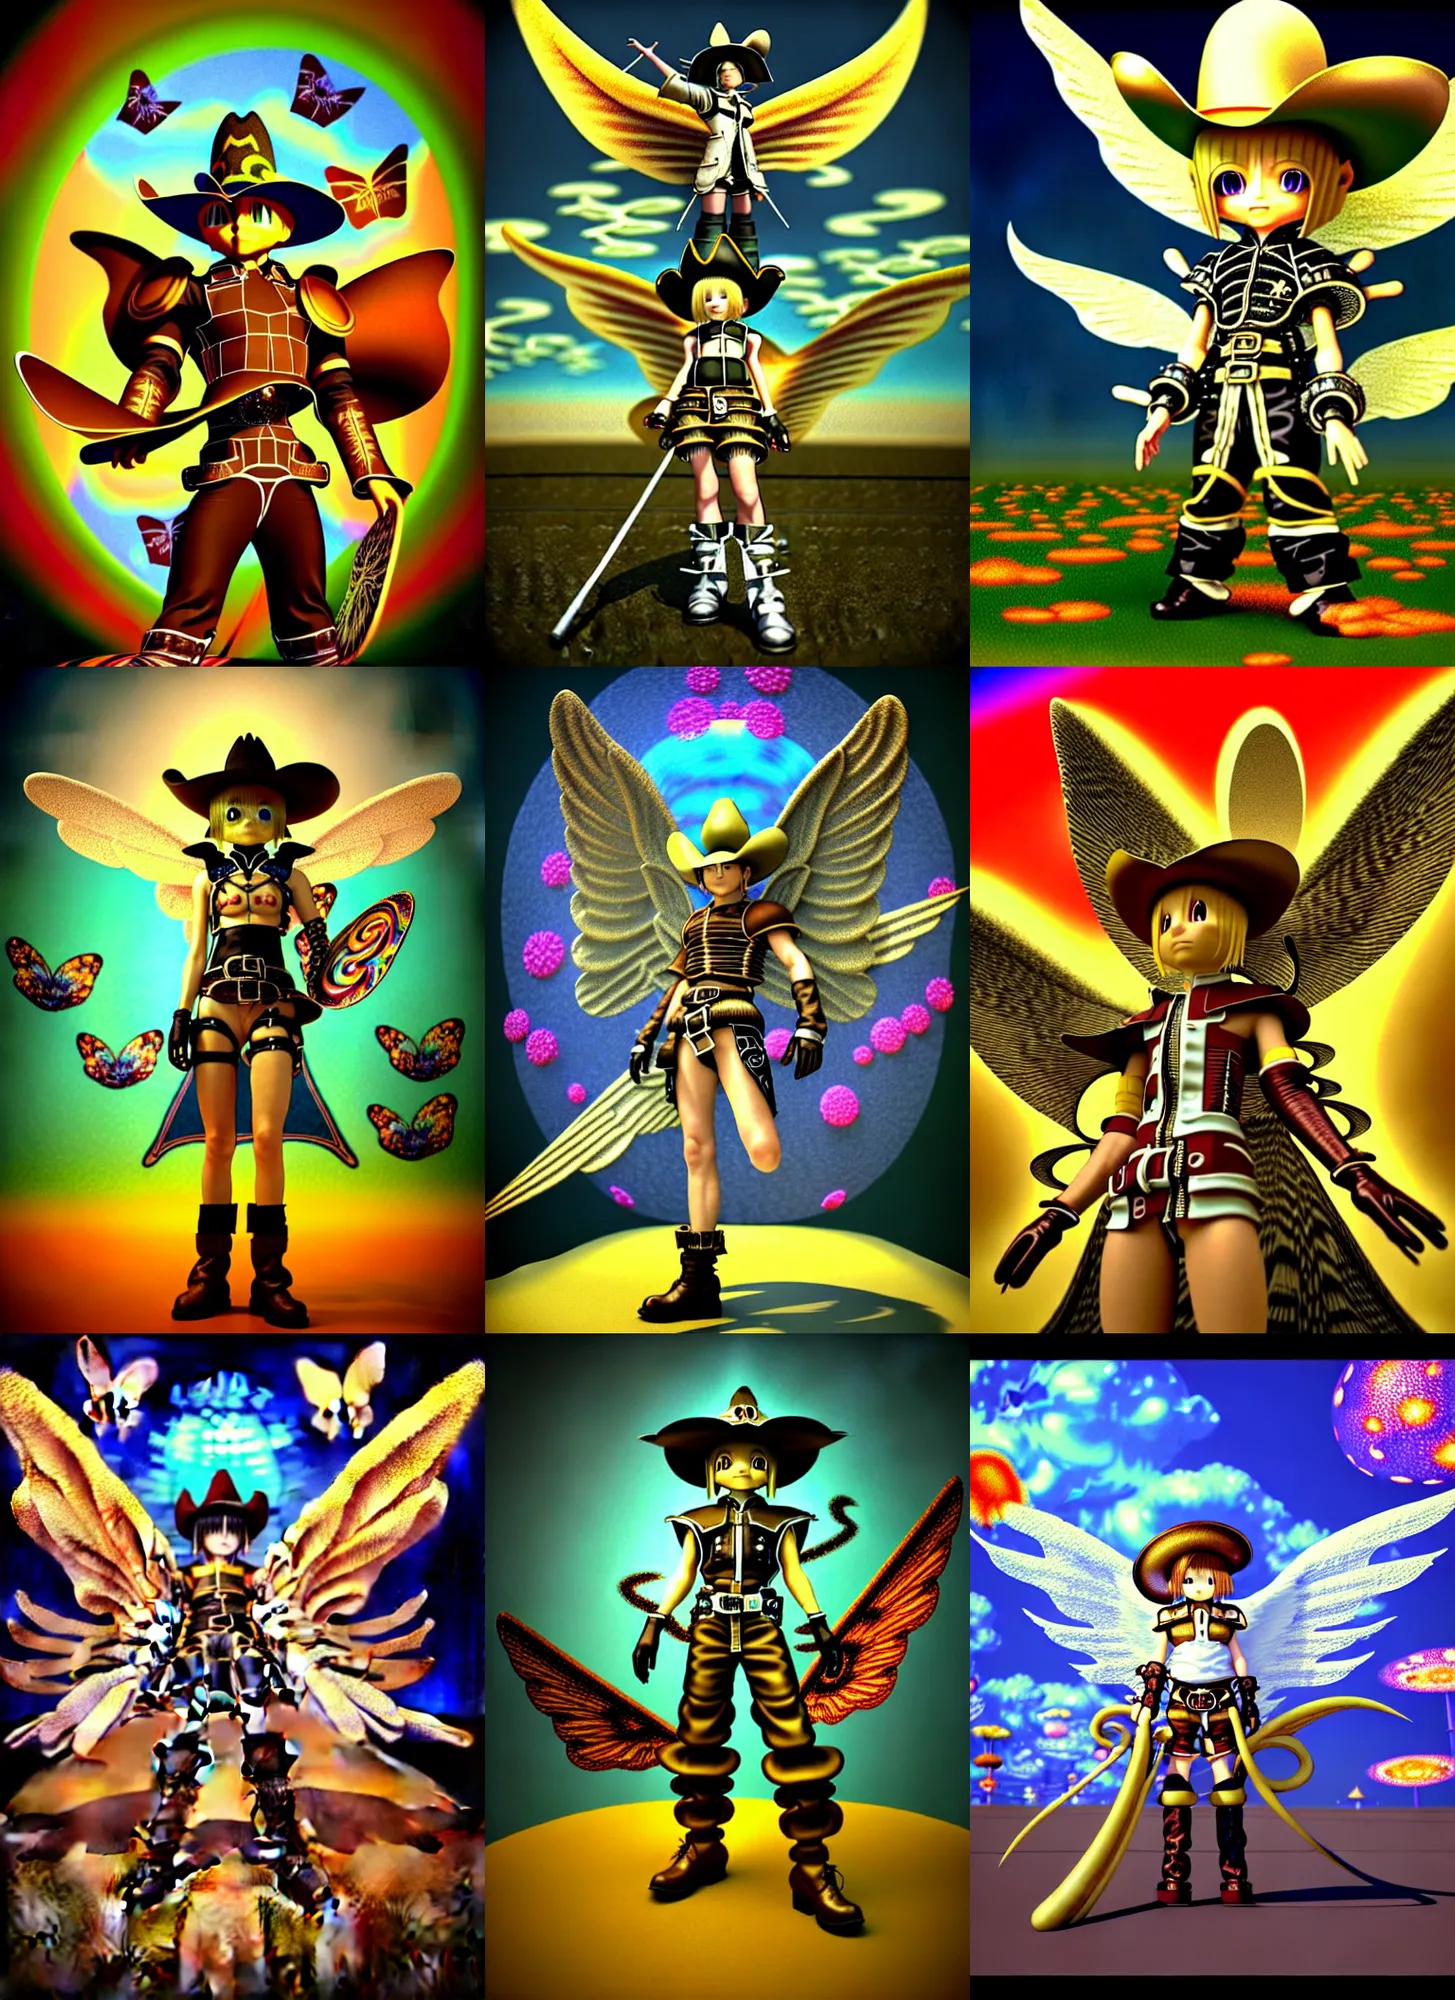 Prompt: vintage cgi 3 d render in the style of micha klein of chibi cyborg knight final fantasy ix by ichiro tanida wearing a big cowboy hat and wearing angel wings in front of a psychedelic swirly background filled 3 d butterflies and 3 d flowers n the style of 1 9 9 0's cg graphics 3 d rendered y 2 k aesthetic by ichiro tanida, 3 d render